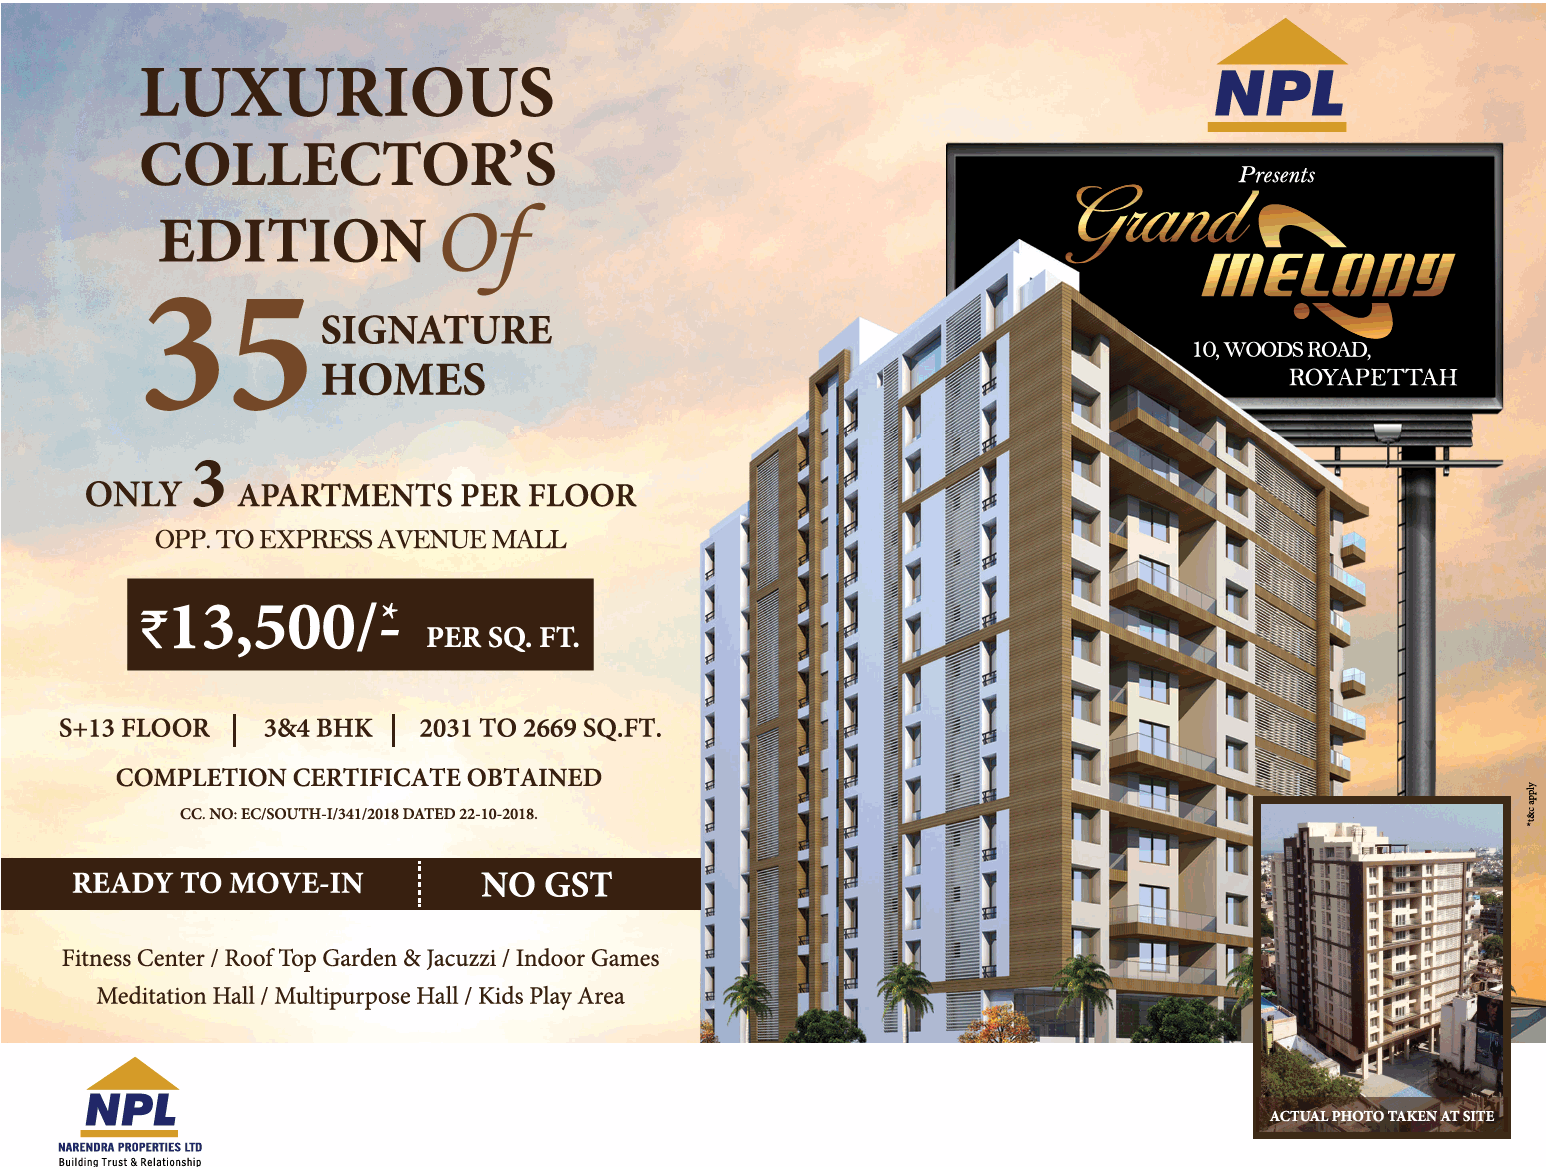 Avail 3 & 4 bhk apartments at NPL Grand Melody in Chennai Update